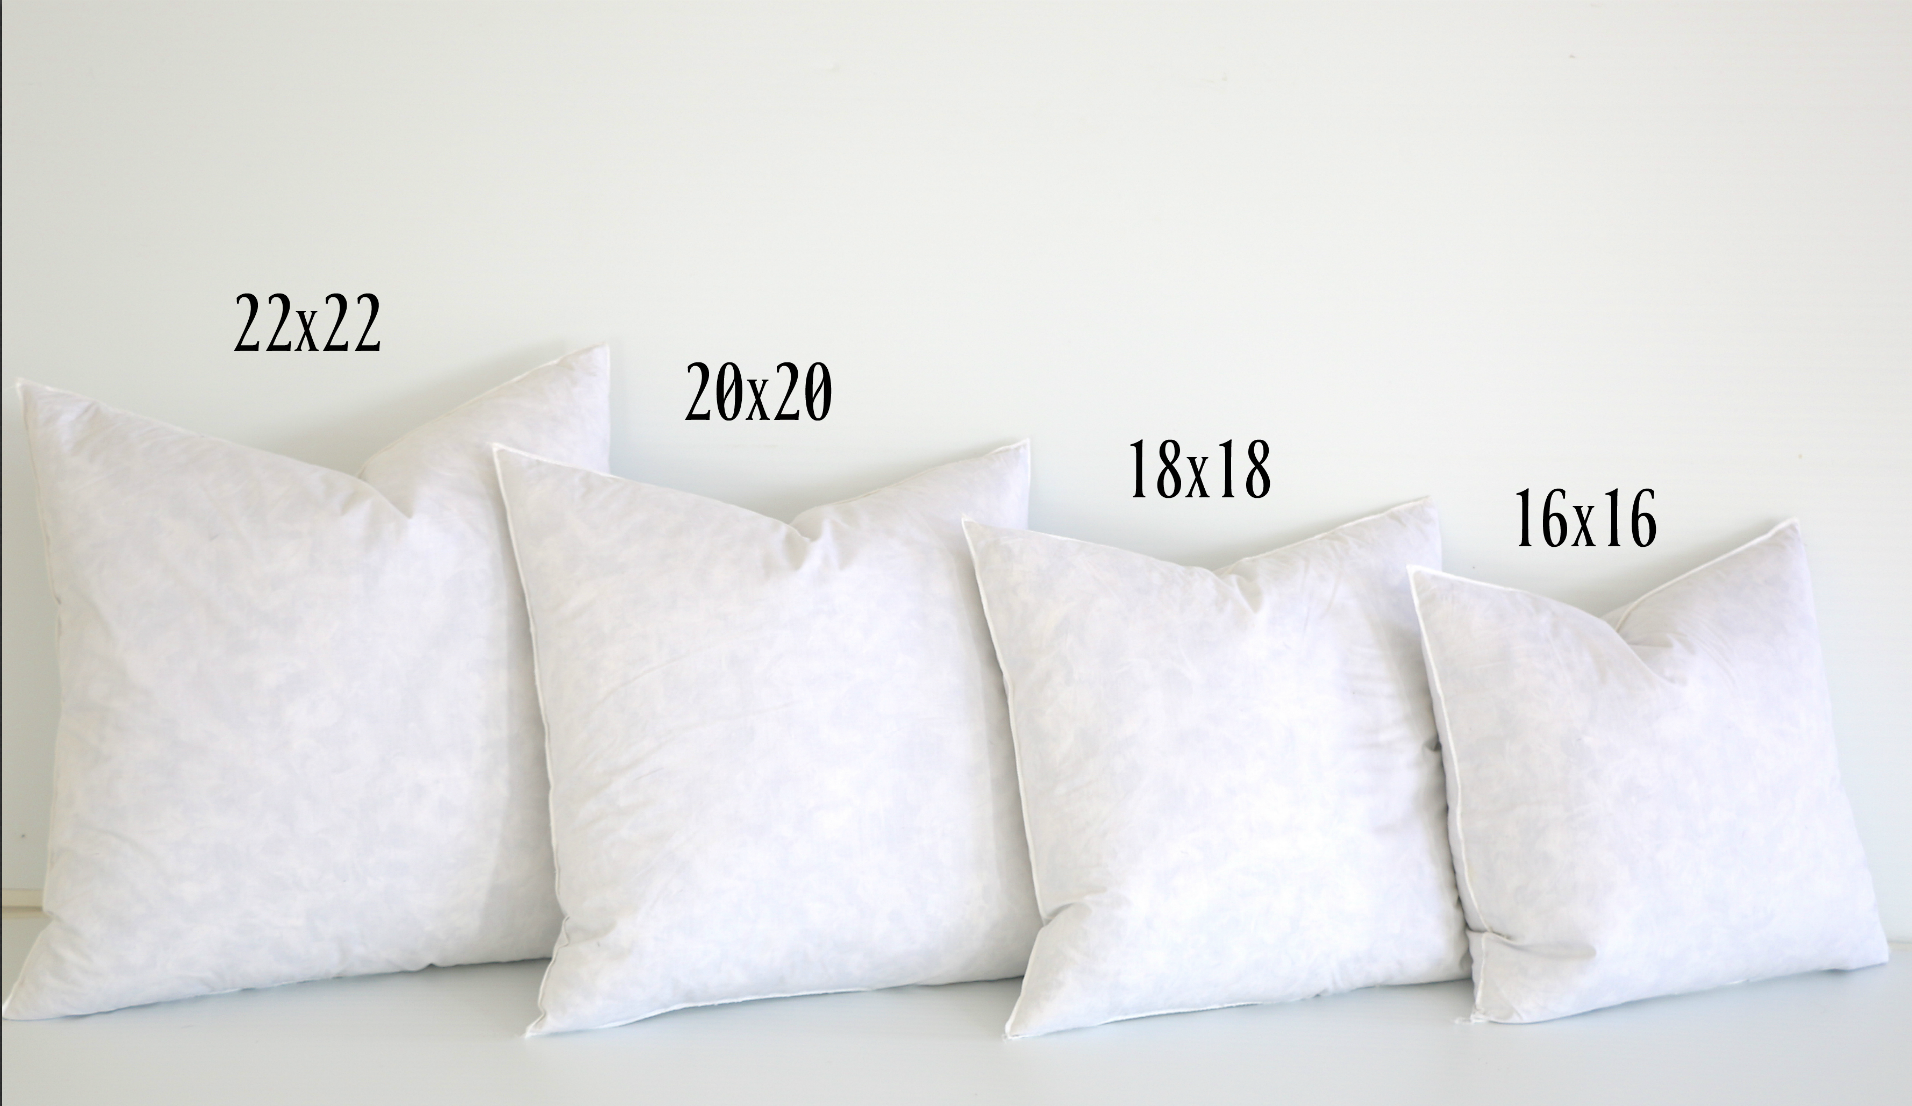 Custom Down Pillow Inserts for Bedding 